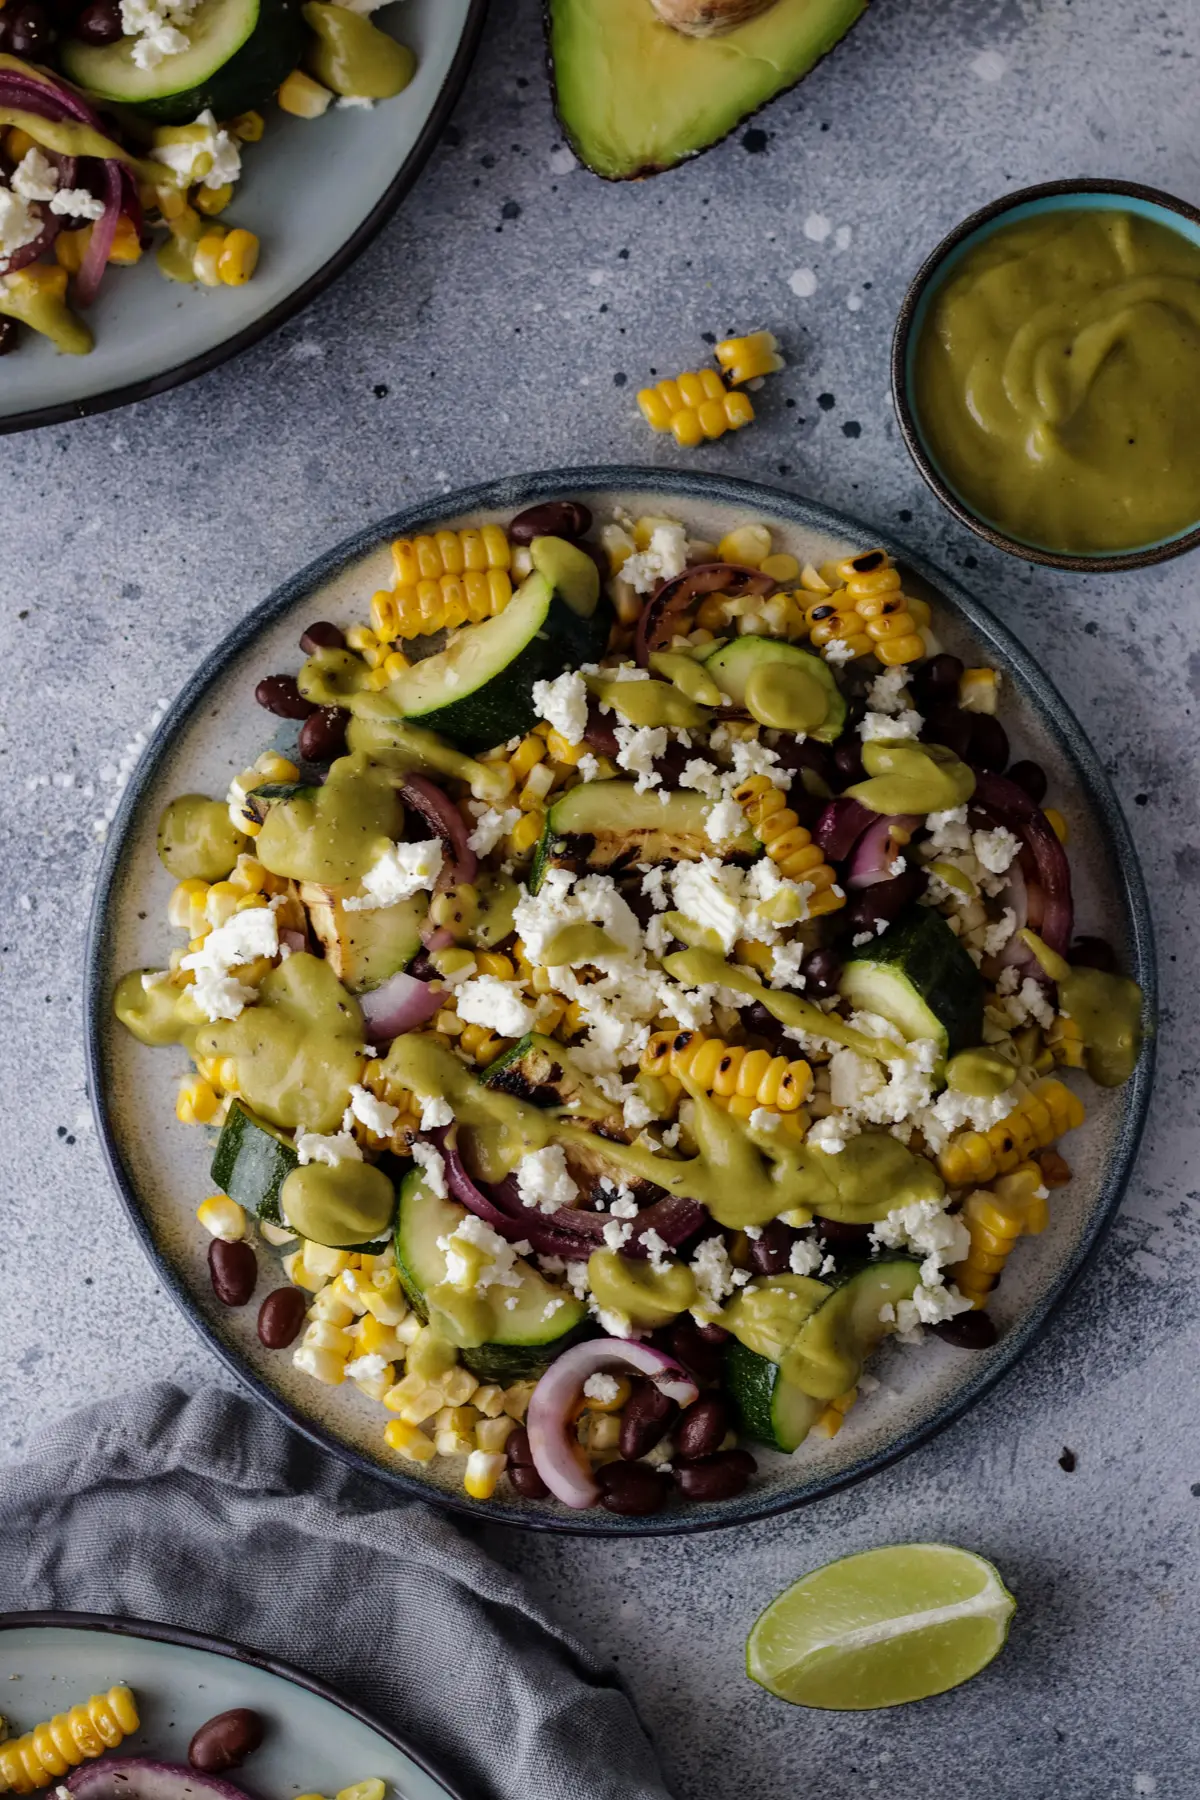 A Plate with Grilled Corn and Black Bean Salad Next to a Bowl with Avocado Dressing